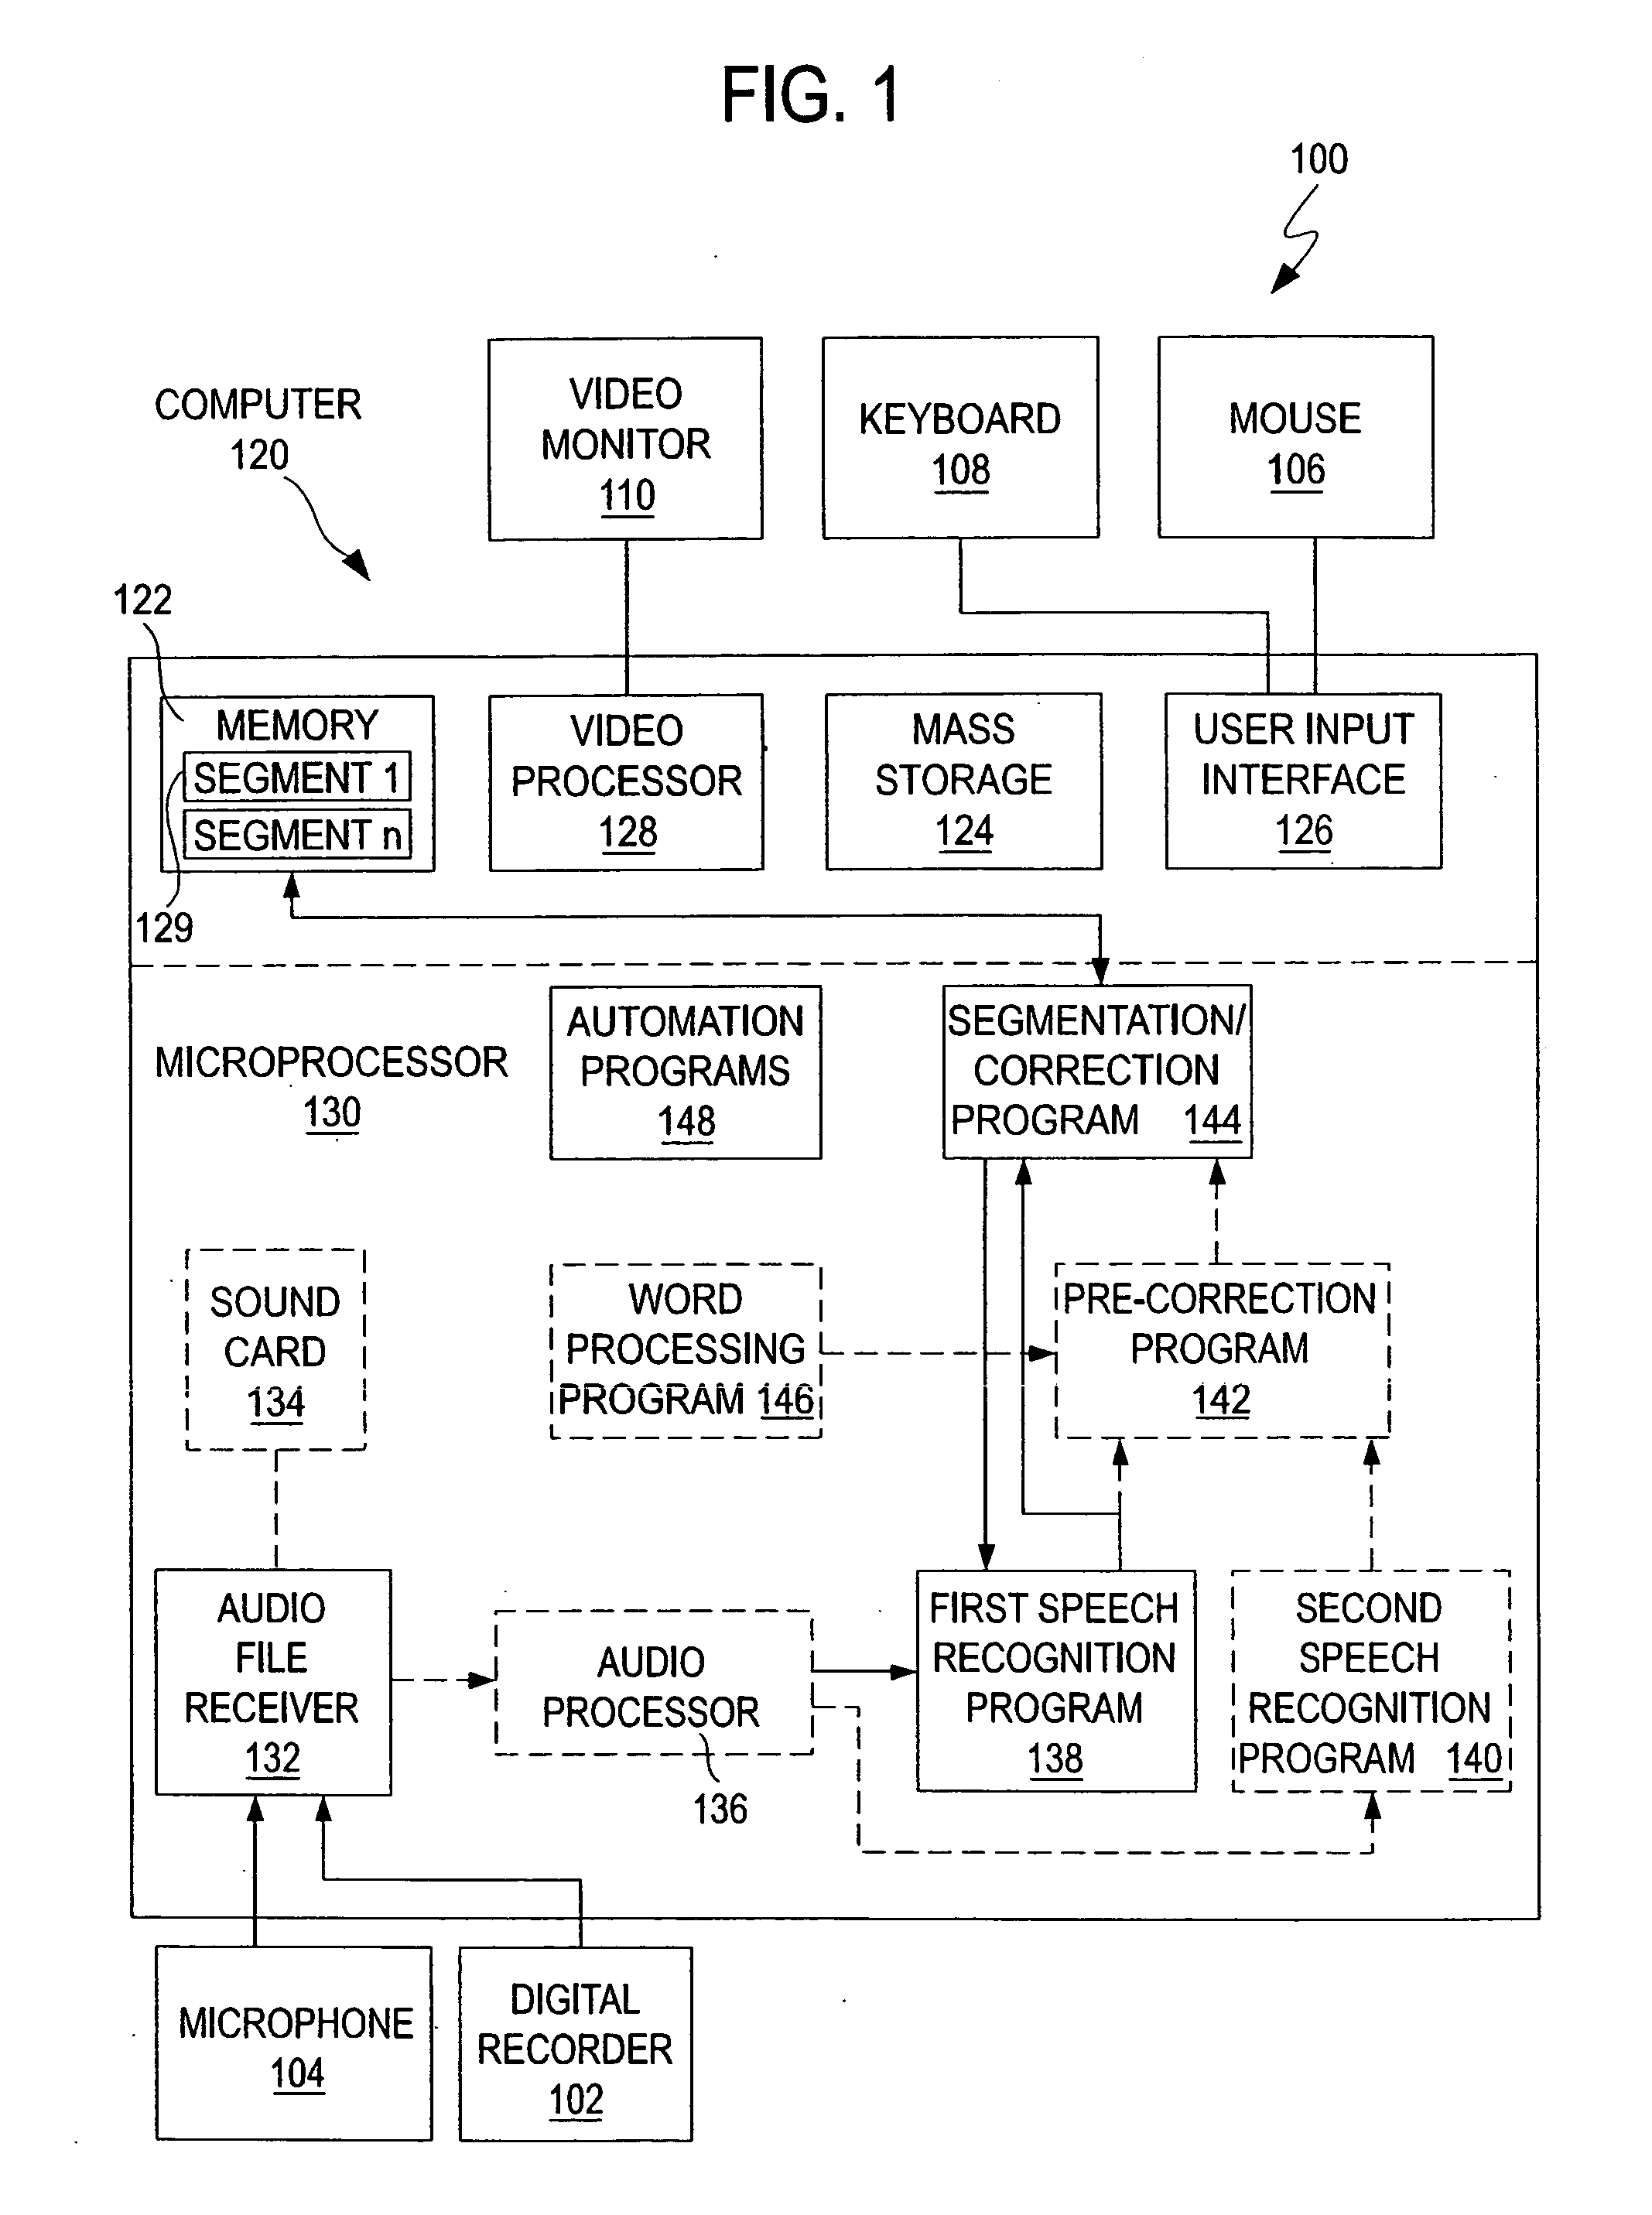 System for permanent alignment of text utterances to their associated audio utterances